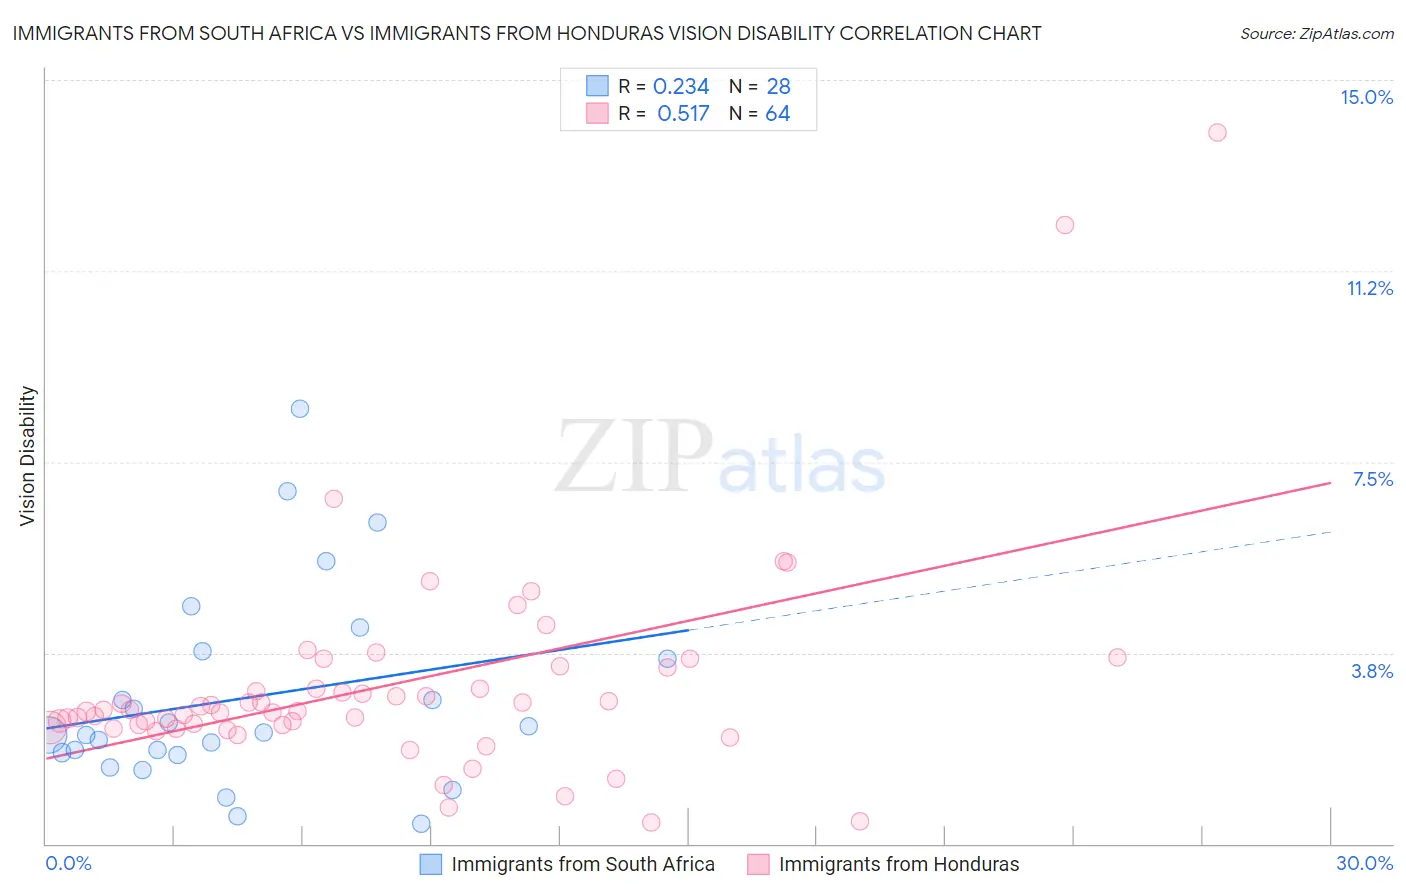 Immigrants from South Africa vs Immigrants from Honduras Vision Disability